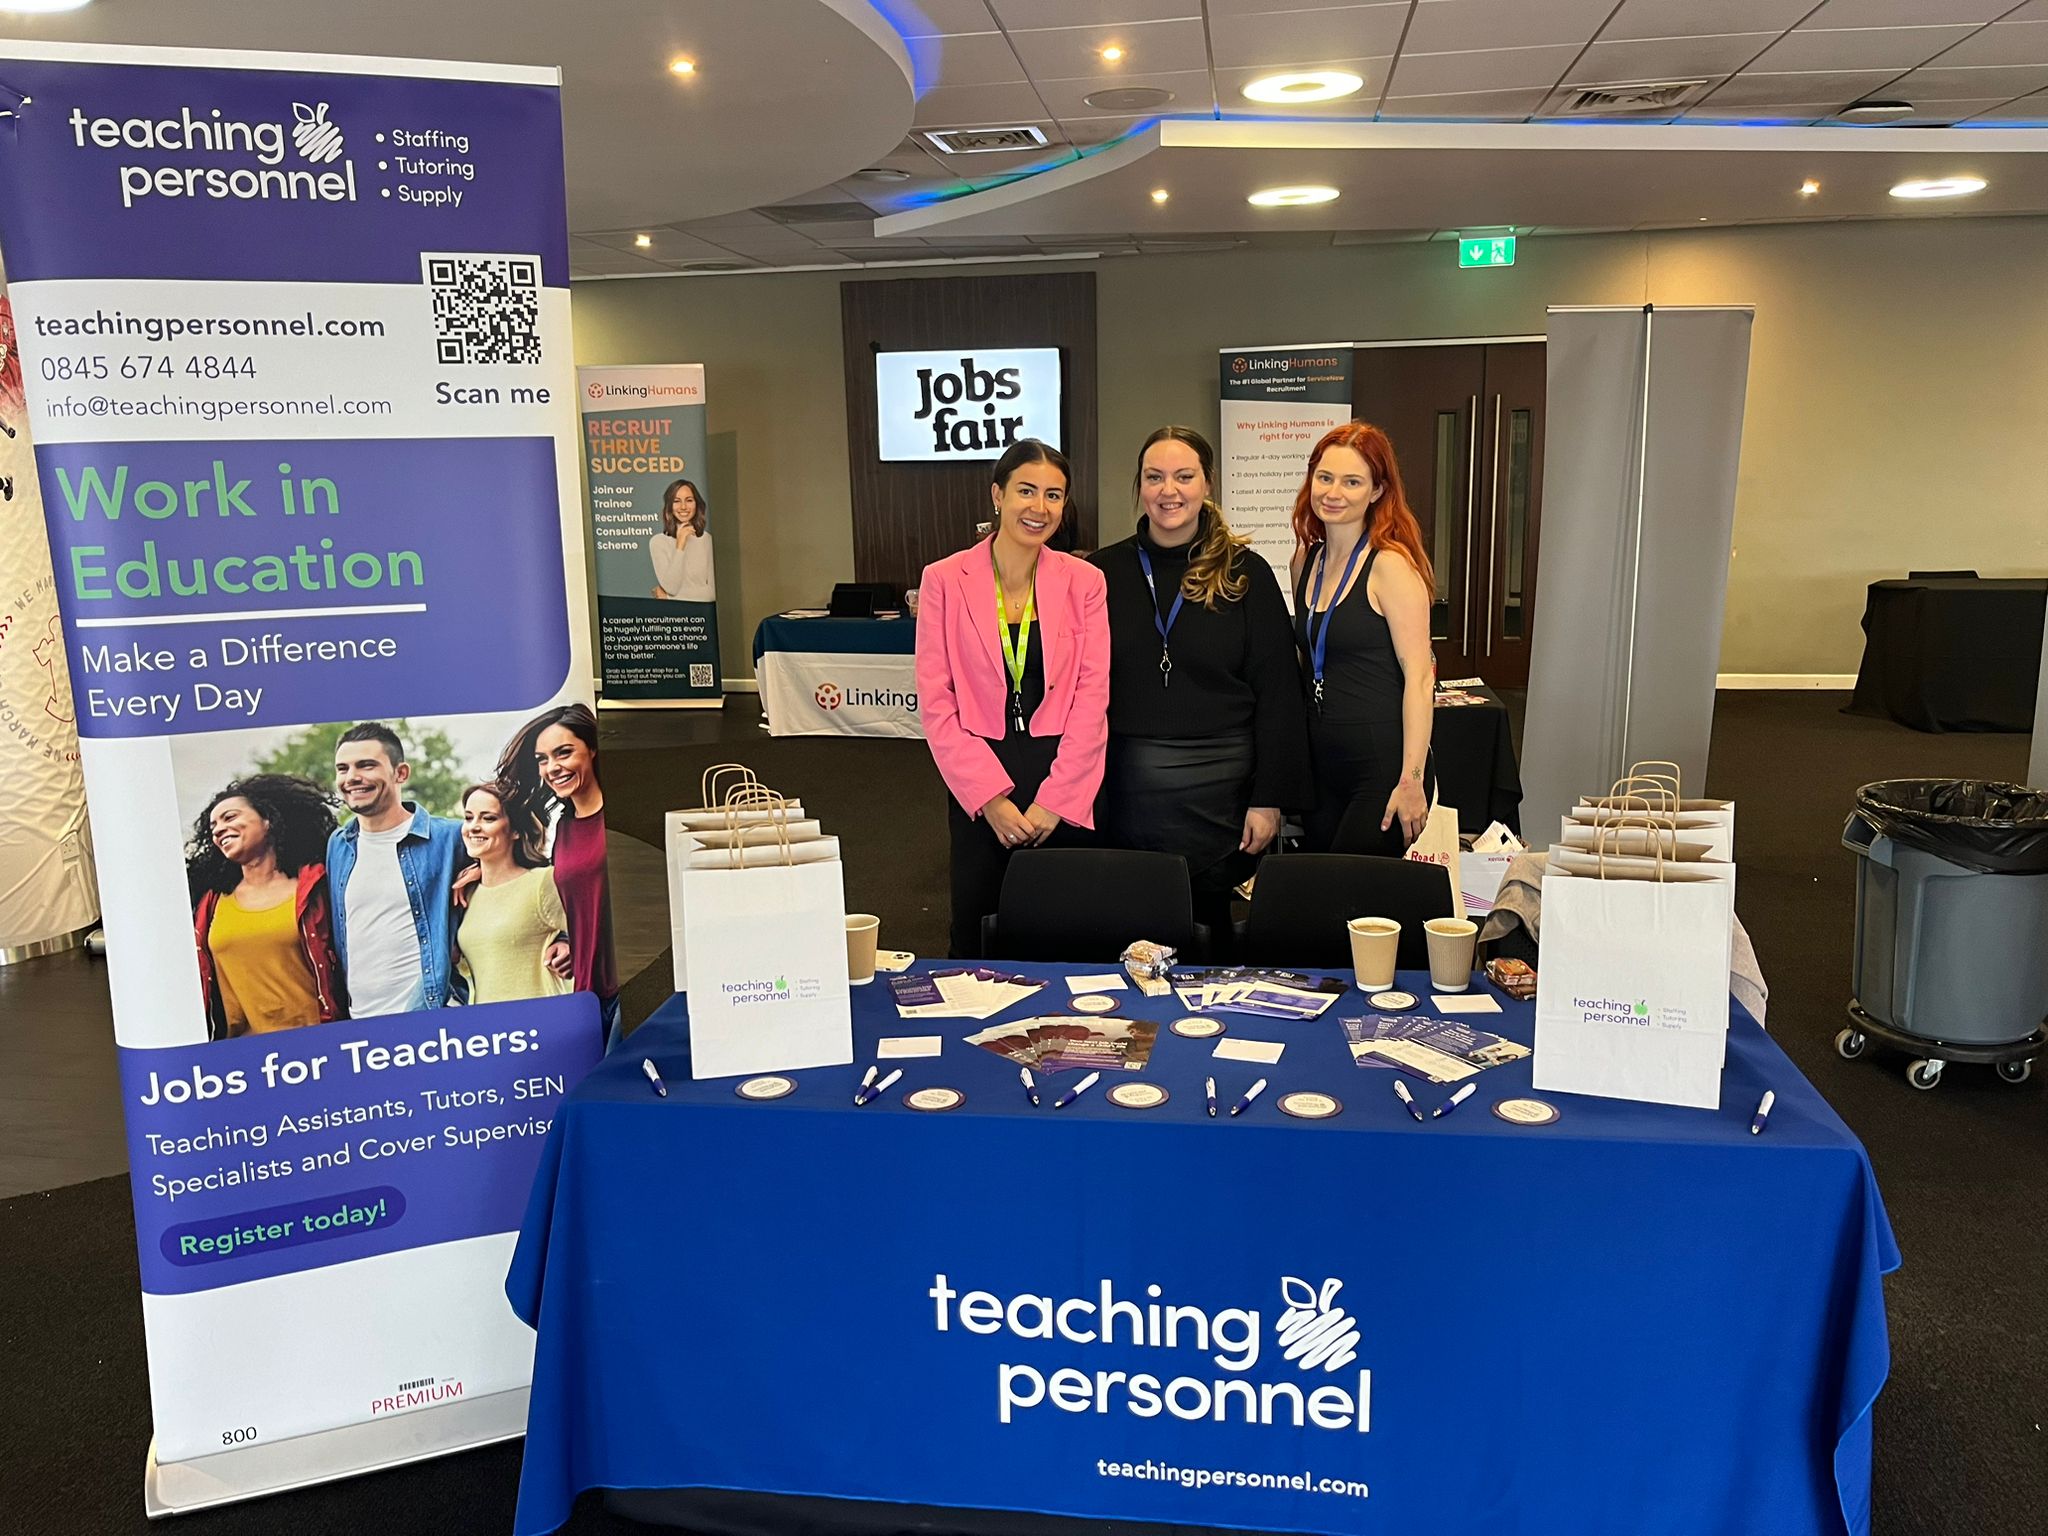 Teaching Personnel at our event in Southampton